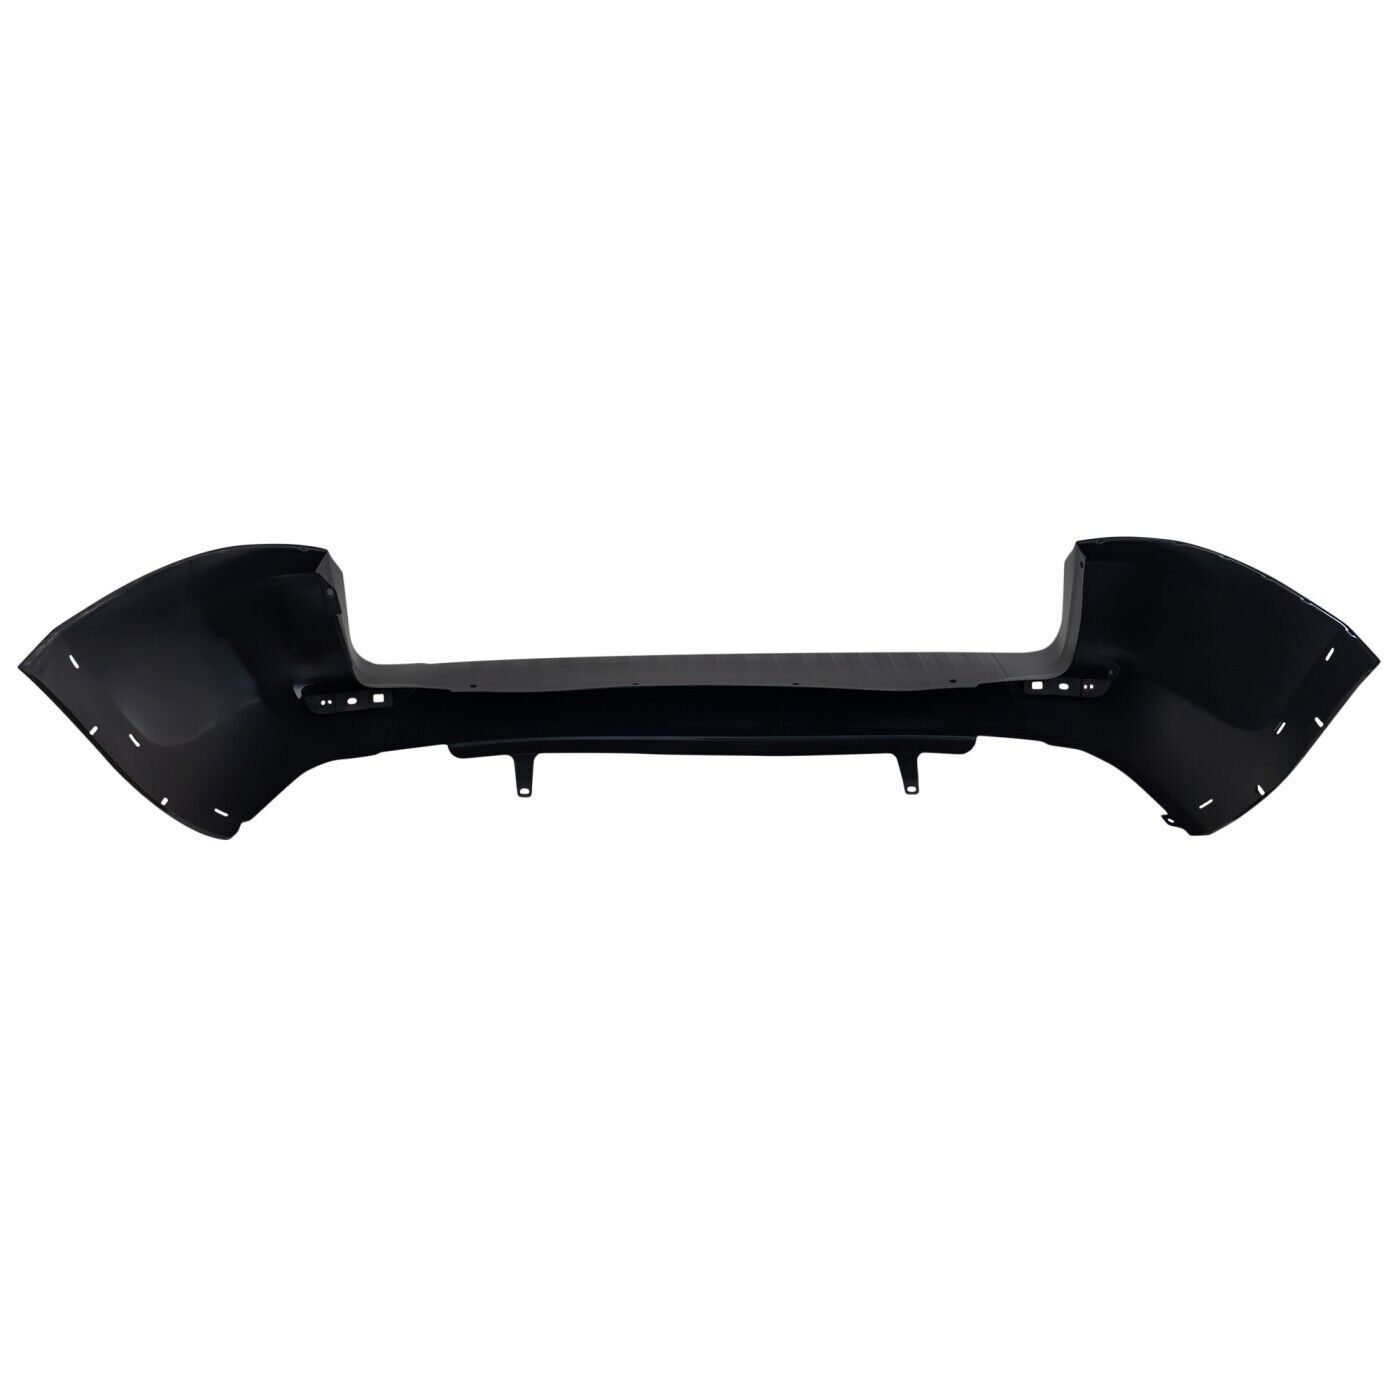 2009-2012 TOYOTA RAV4 Rear Bumper Cover w/Wheel Opening Flares  w/Gate Mtd Spare Painted to Match